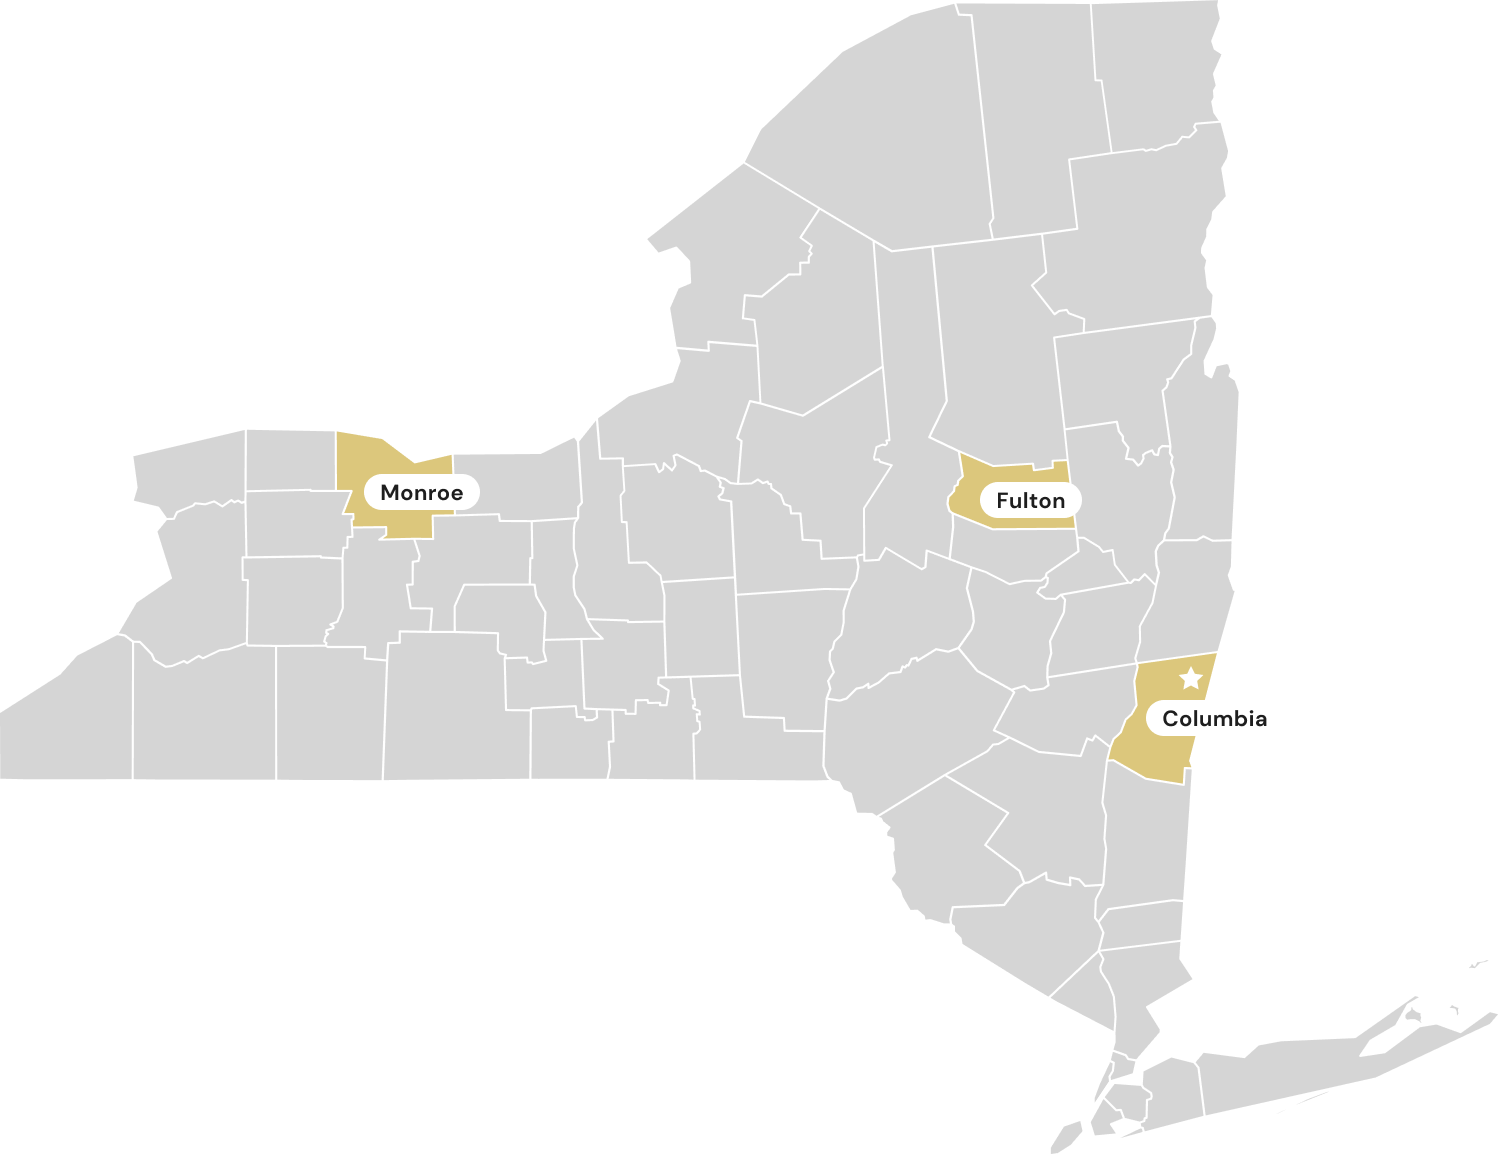 Map of new york state highlighting monroe, fulton, and columbia counties in a dark monochrome base with labeled counties in a contrasting color.